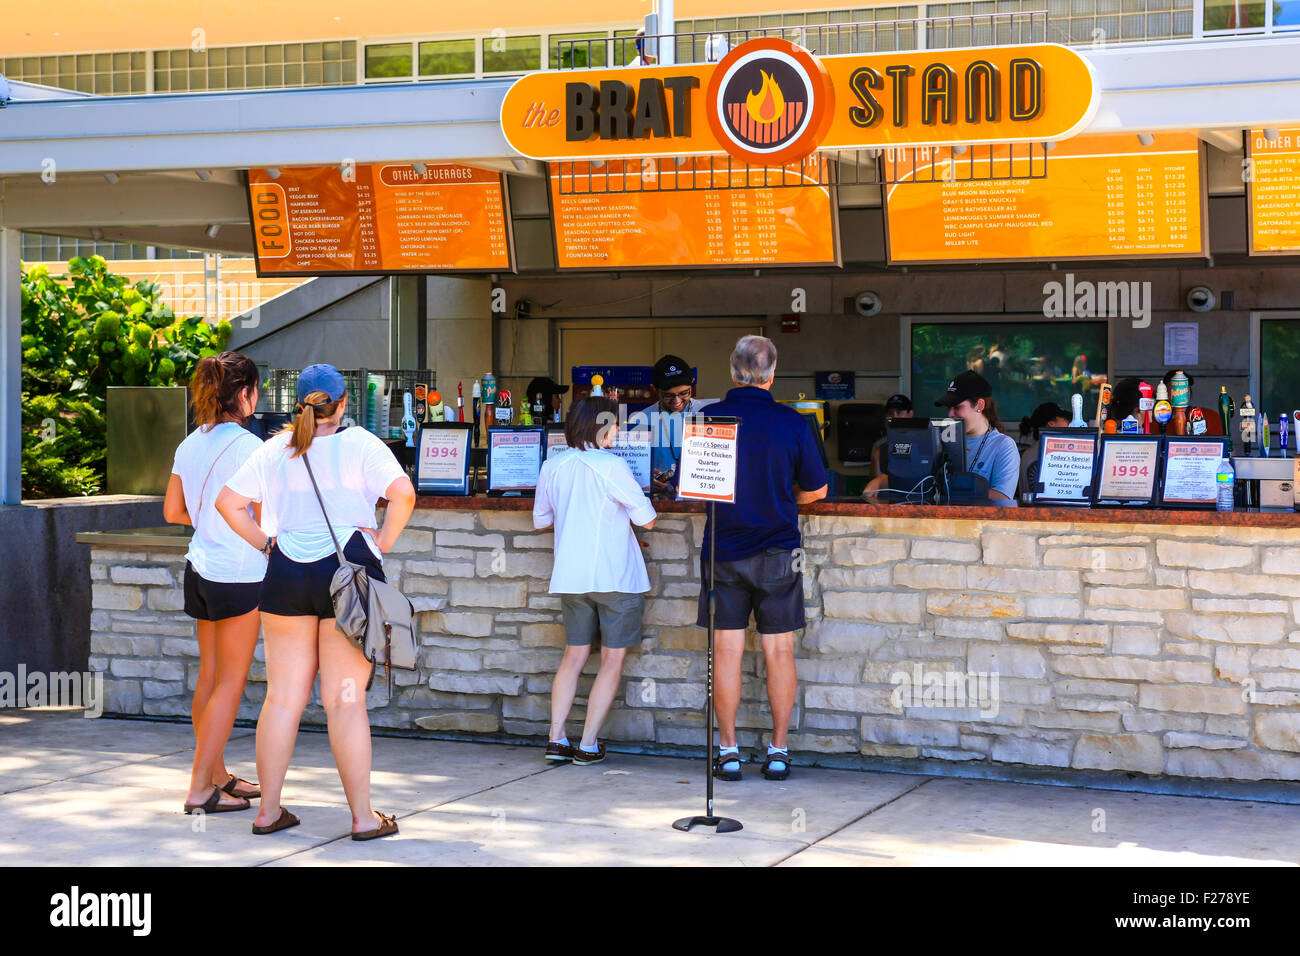 People lining up at the Brat Stand on the Memorial Union Terrace on the edge of Lake Mendota in Madison Wisconsin Stock Photo